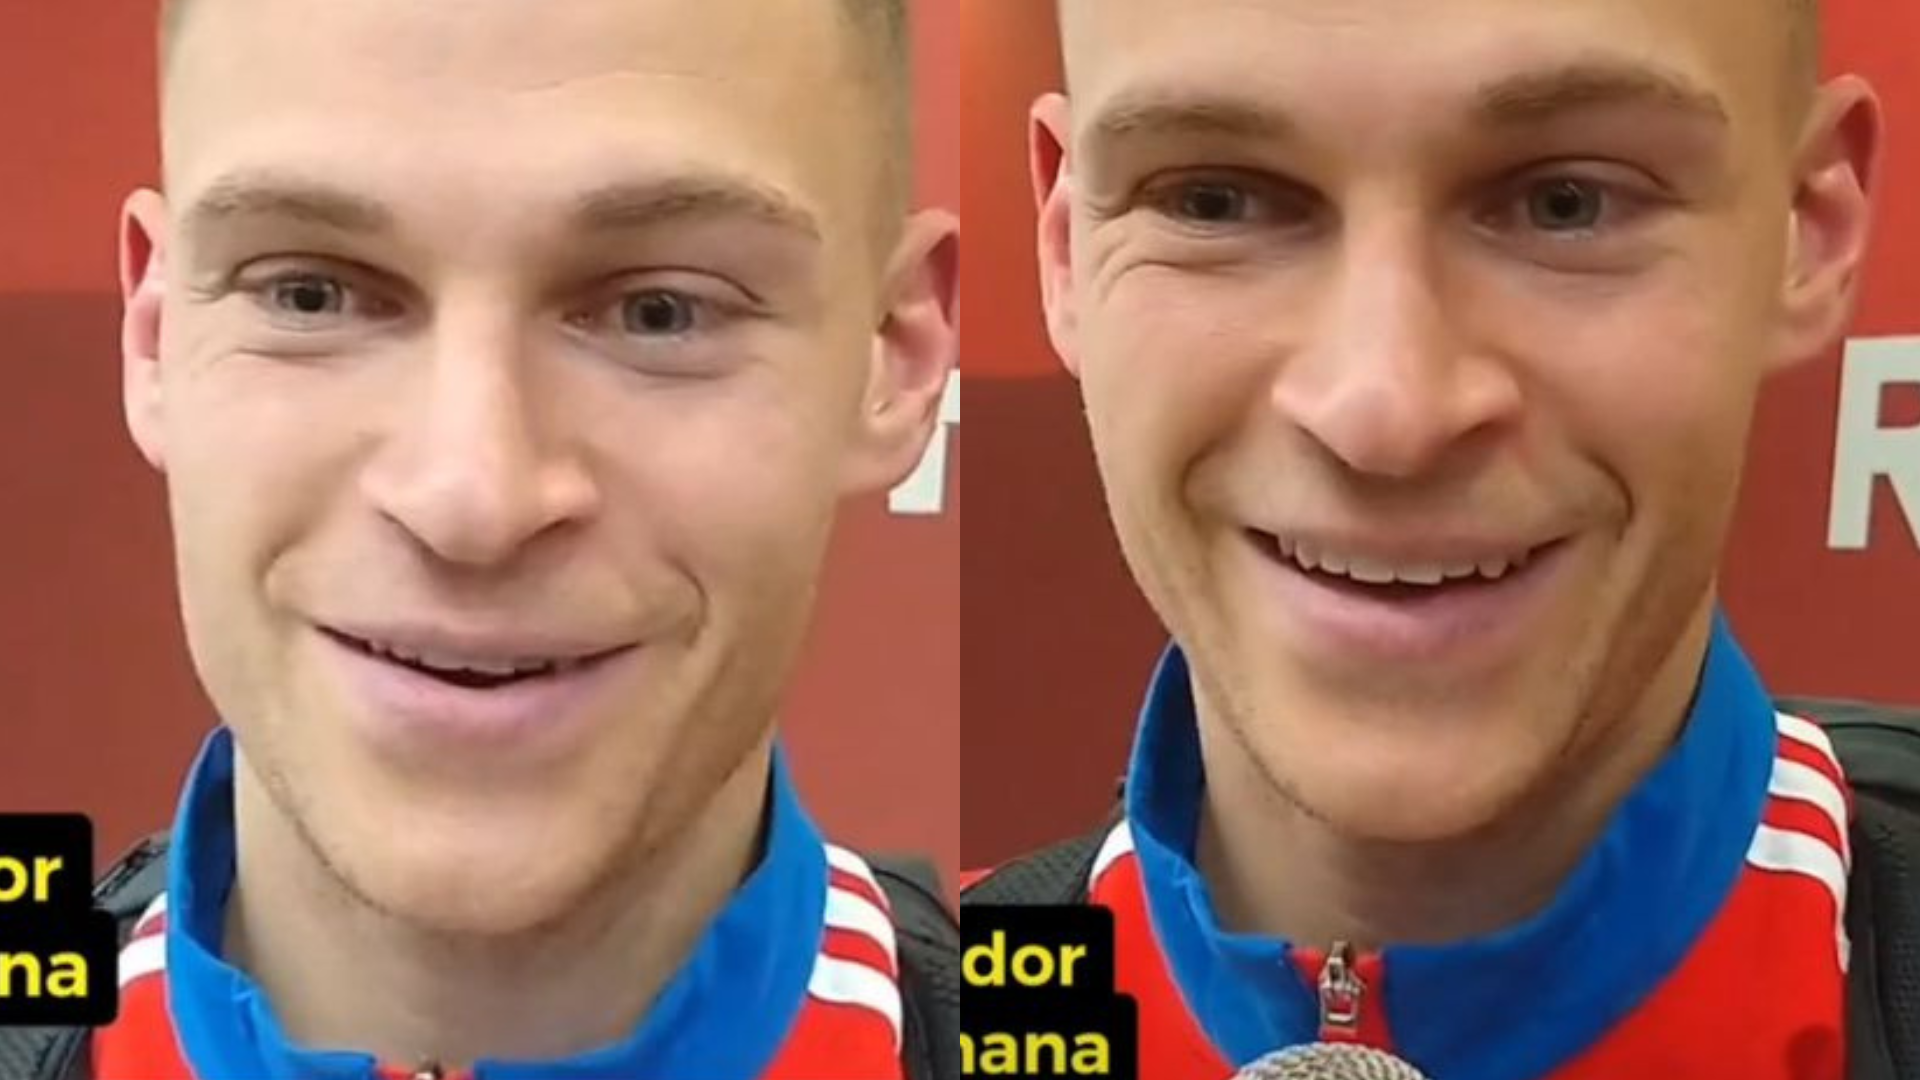 Joshua Kimmich's reaction when asked about Peru vs Germany.